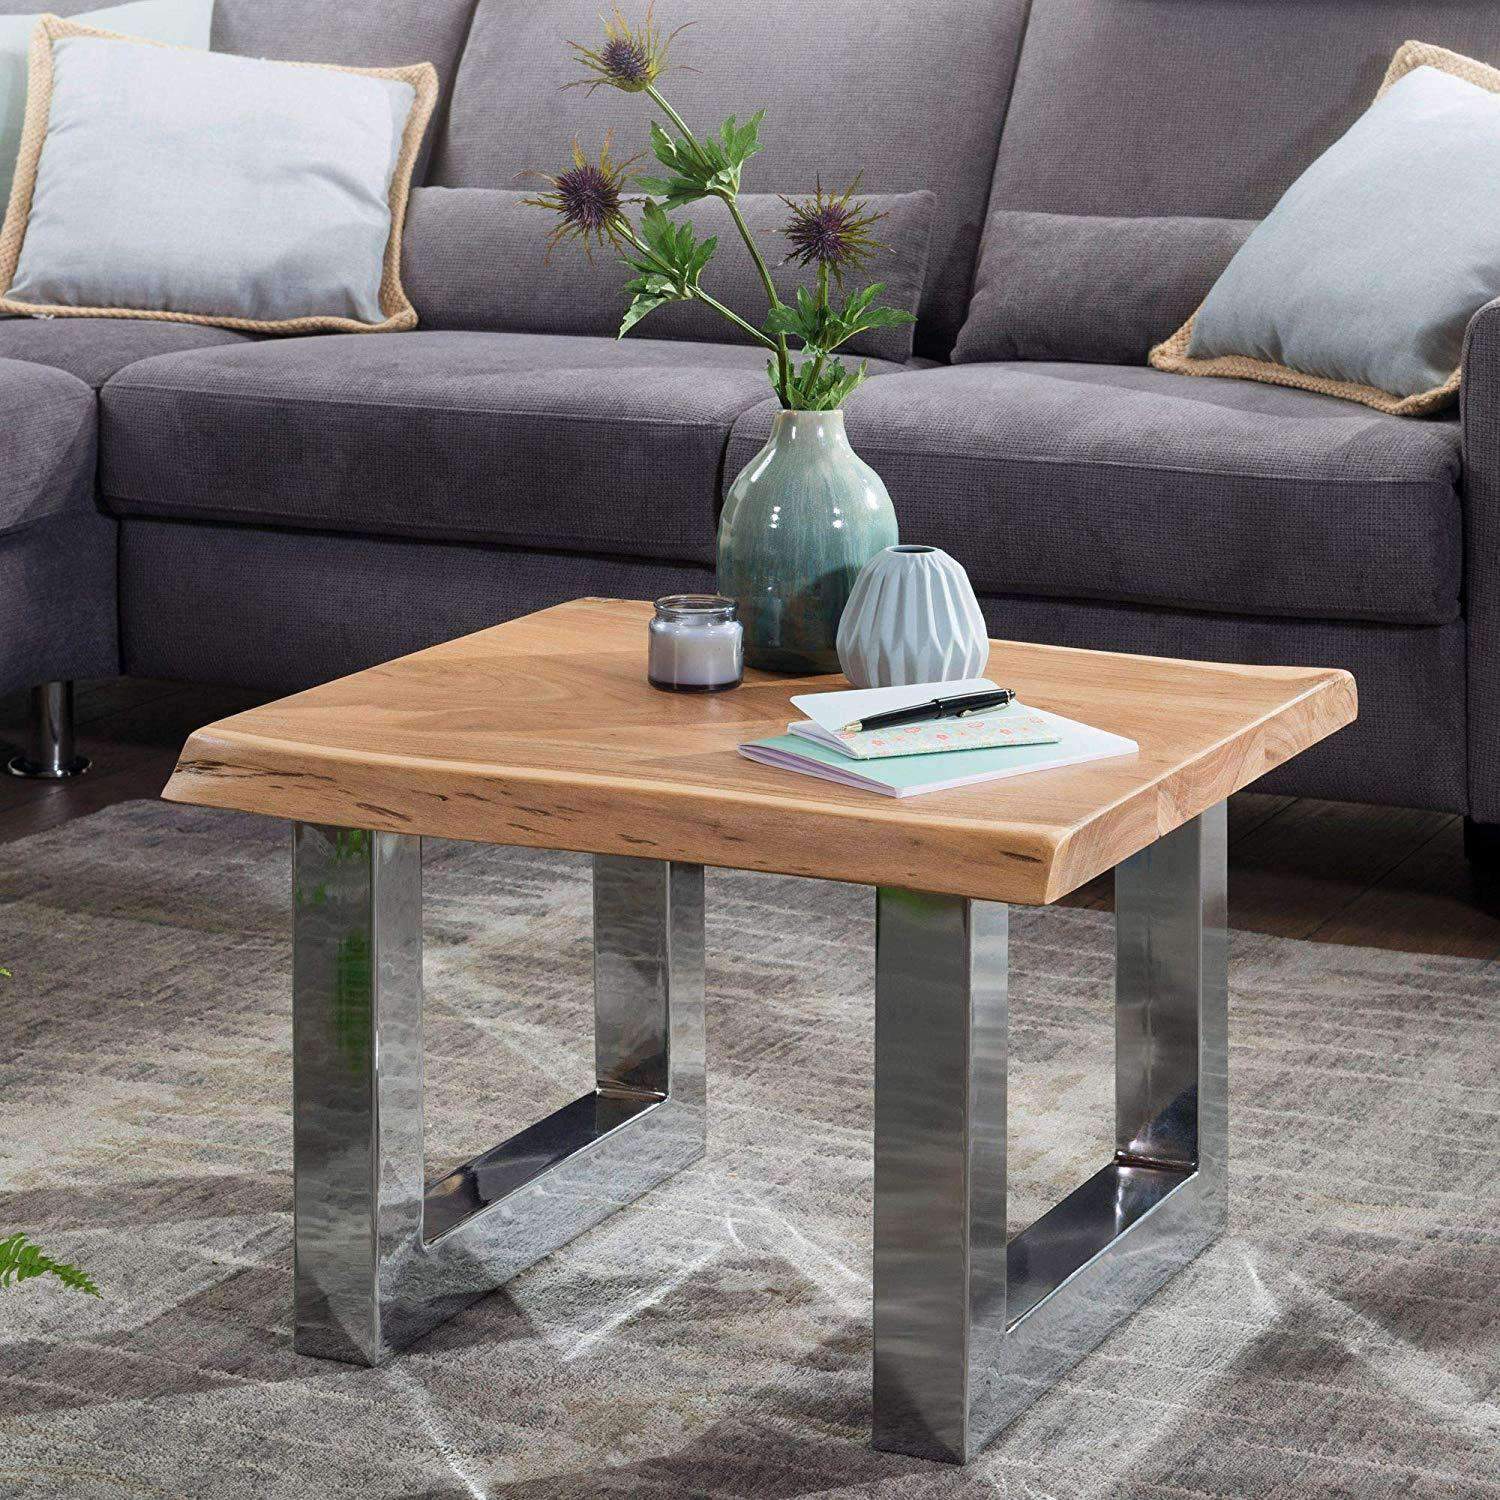 Nancy's Coffee Table - Side Table - Solid Wood - 58 x 40 x 60 cm